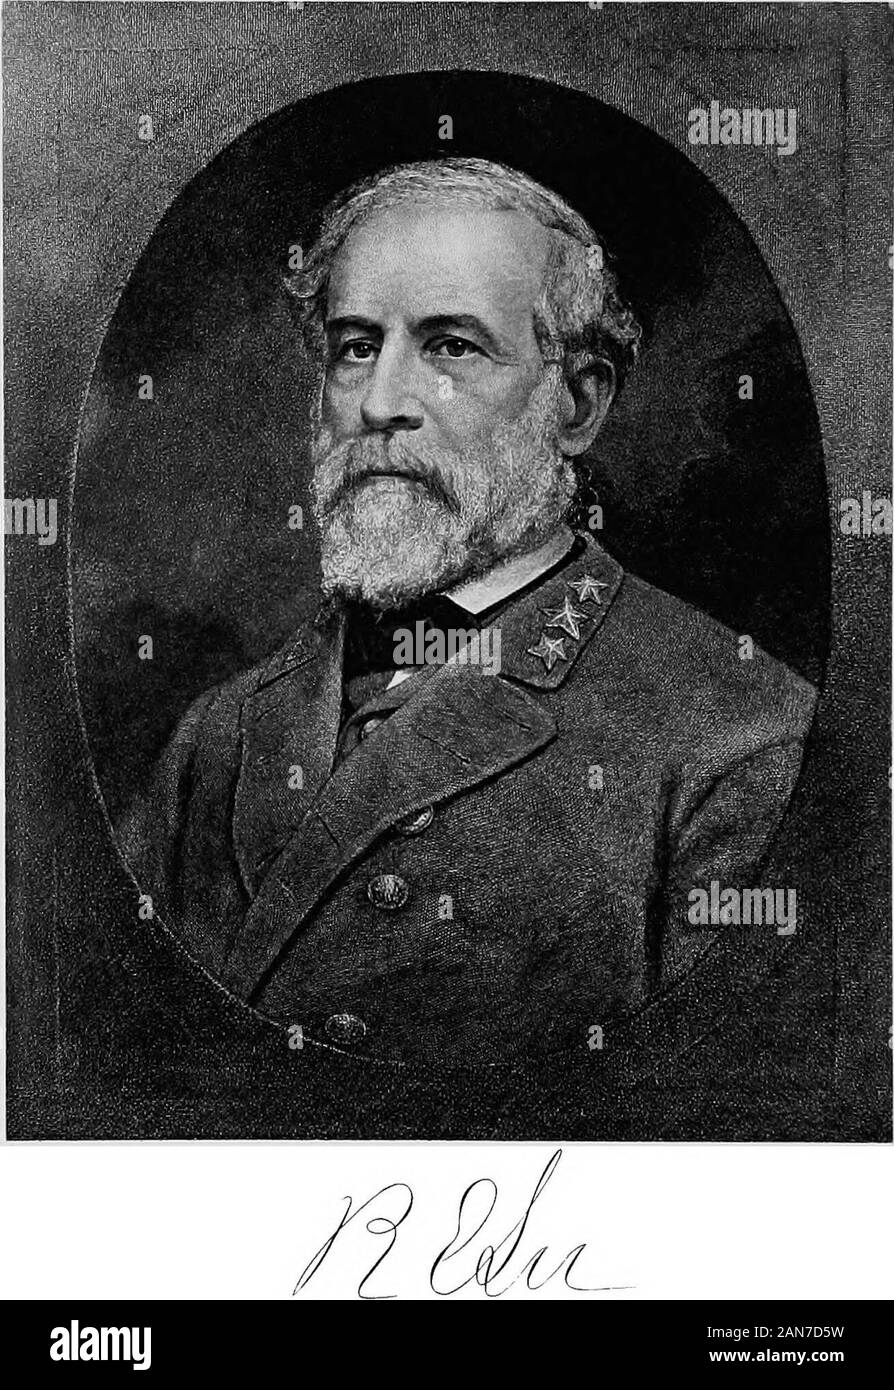 Lee's dispatches; unpublished letters of General Robert ELee, C.S.A., to Jefferson Davis and the War Department of the Confederate States of America, 1862-65, from the private collections of Wymberley Jones De Renne .. . It^ji!. Robert E. Lee From the portrait by Wm. E. Marshall Reproduced by permission of James S. Bradley (Copyright, 1907, J. S. Bradley) LEES DISPATCHES Unpublished Letters of General Robert E. Lee, G.S.A. to Jeflferson Davis and the War Department of The Confederate States of America 1862-65 From the Private Collection of WYMBERLEY JONES DE RENNE of Wormsloe, Georgia Edited w Stock Photo